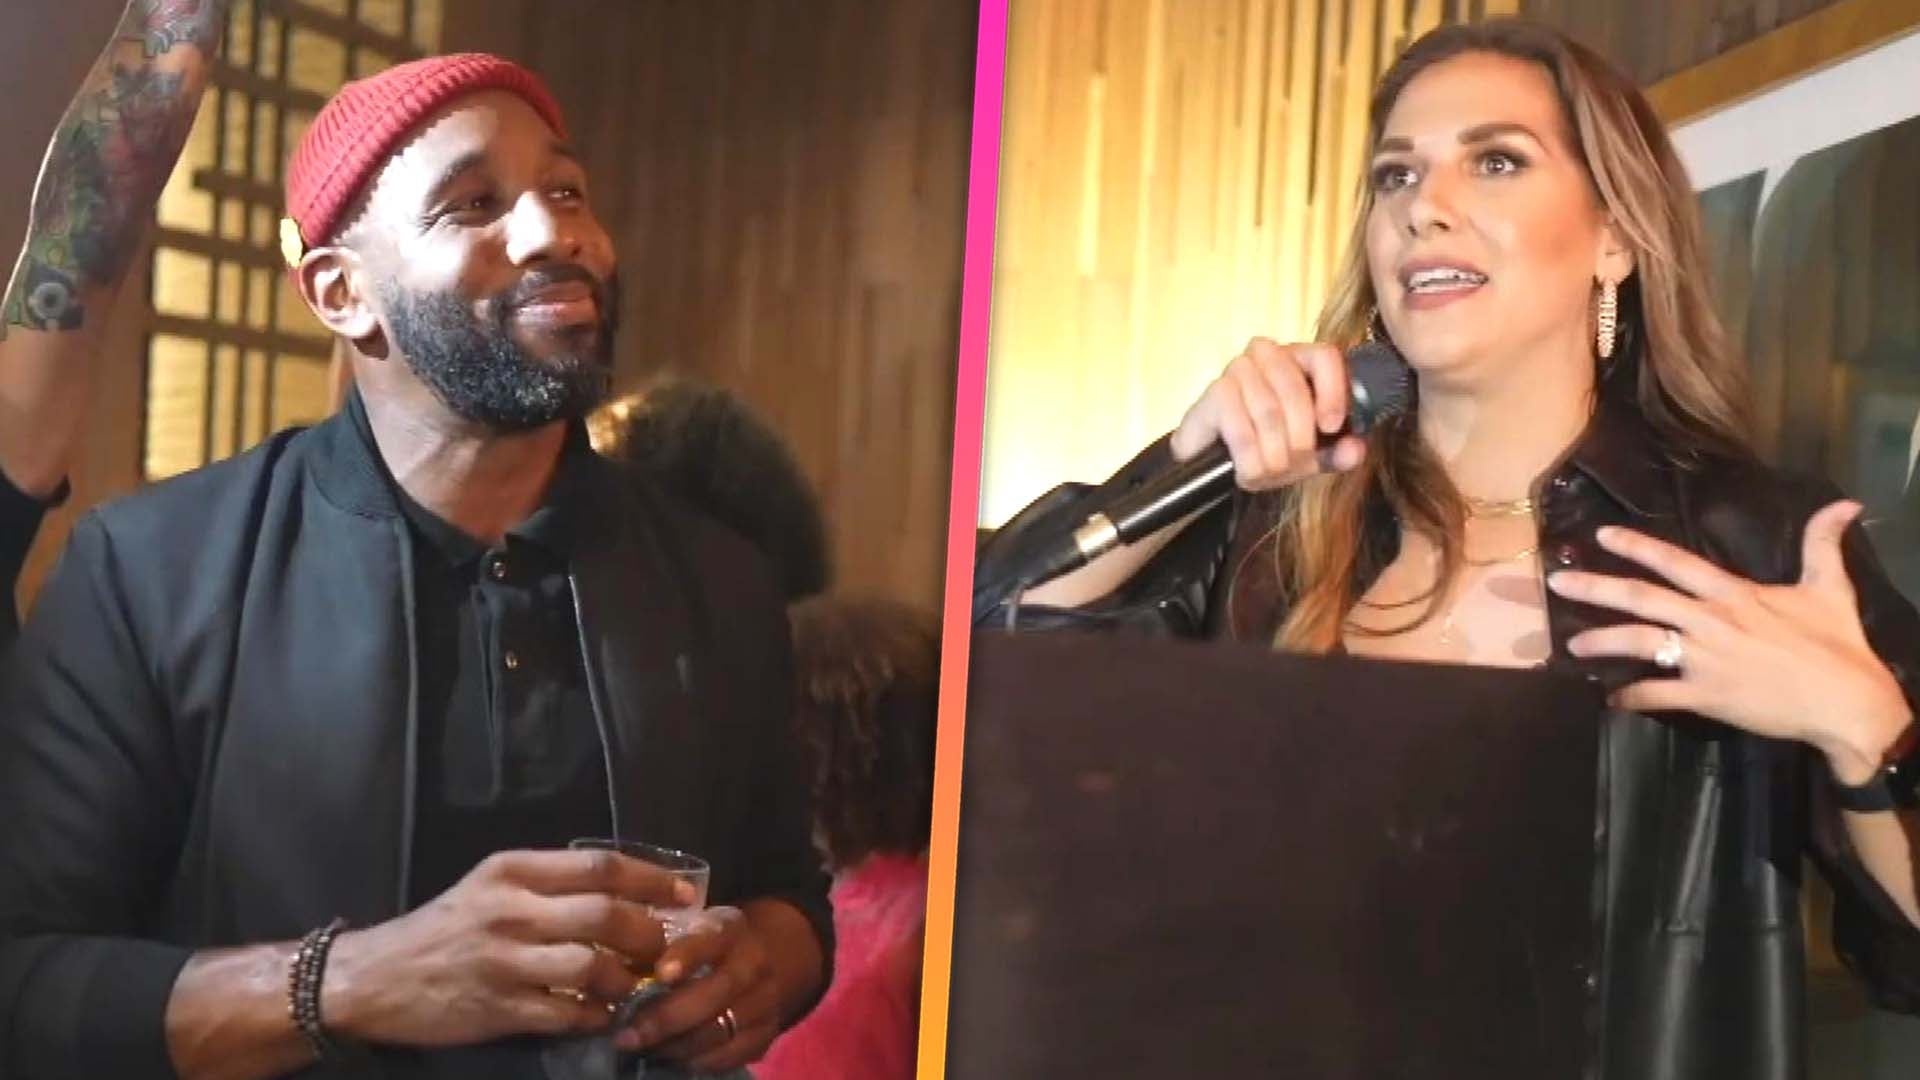 Allison Holker Praised Stephen 'tWitch' Boss as 'Most Inspiring Human' Just Months Before Death